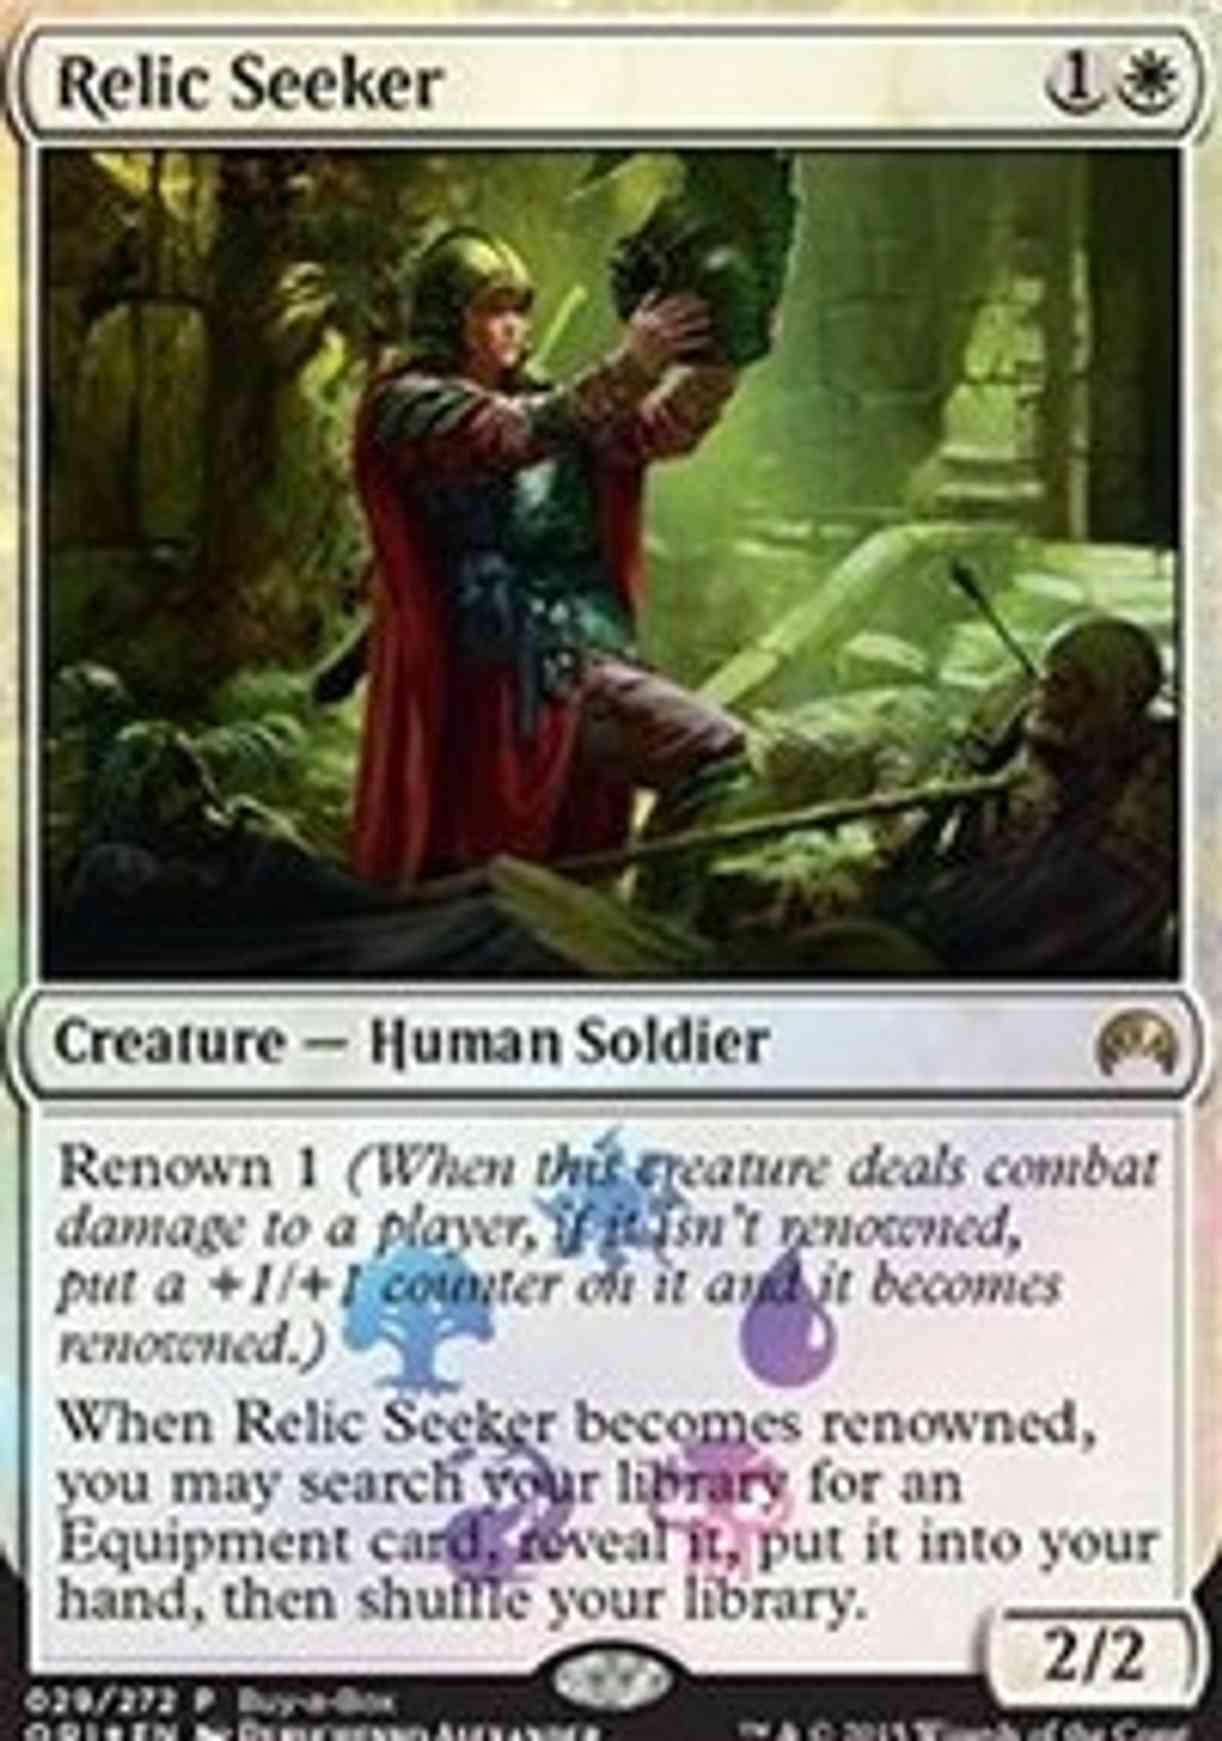 Relic Seeker magic card front